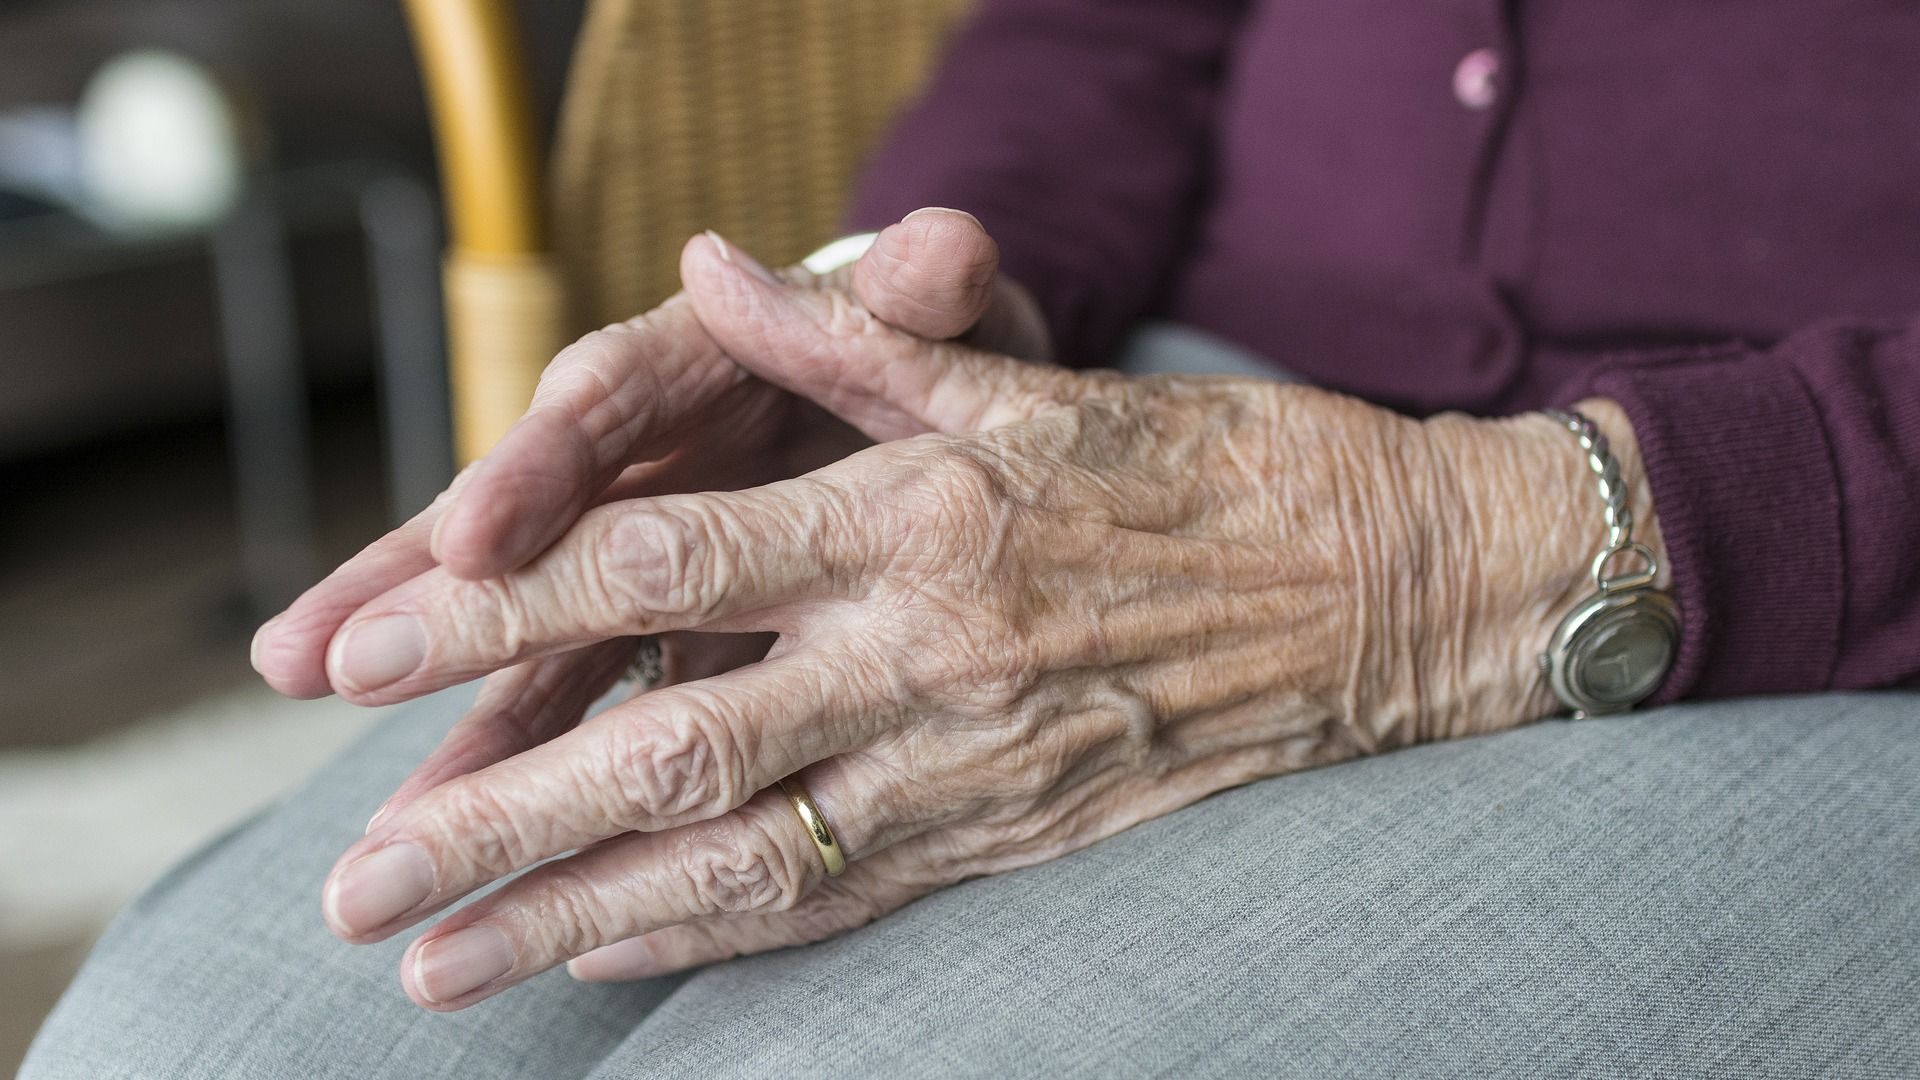 low-income-pensioners-in-wiltshire-to-receive-extra-70-energy-rebate